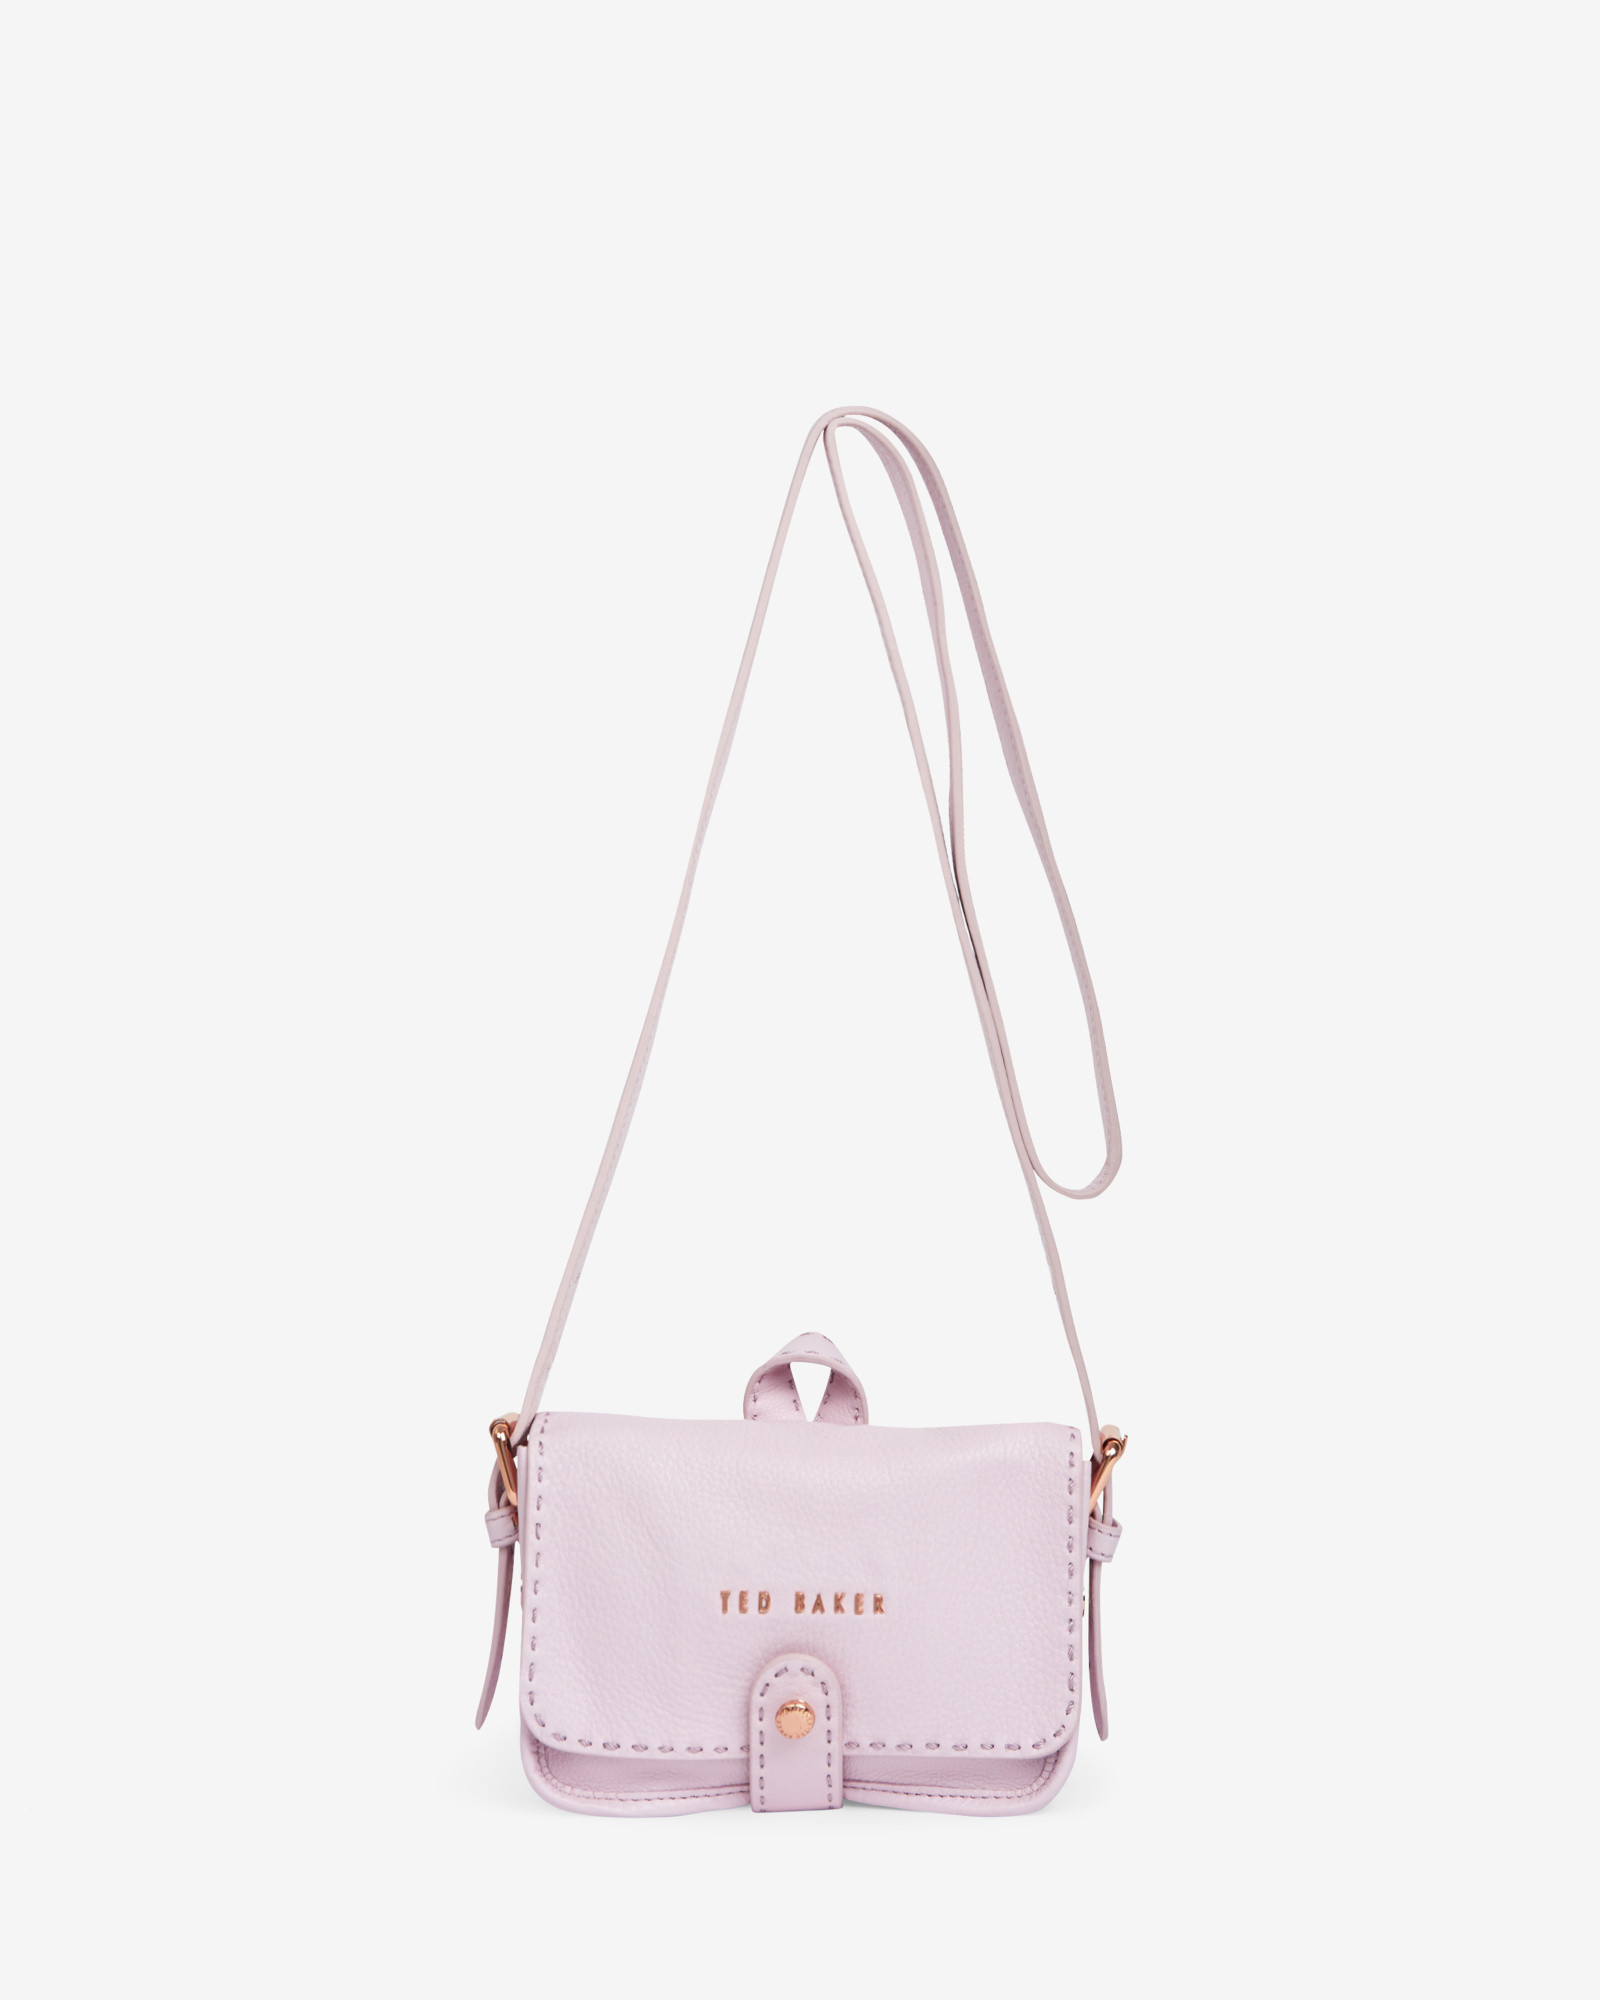 Ted baker Leather Stab Stitch Cross Body Bag in White (Pale Pink) | Lyst